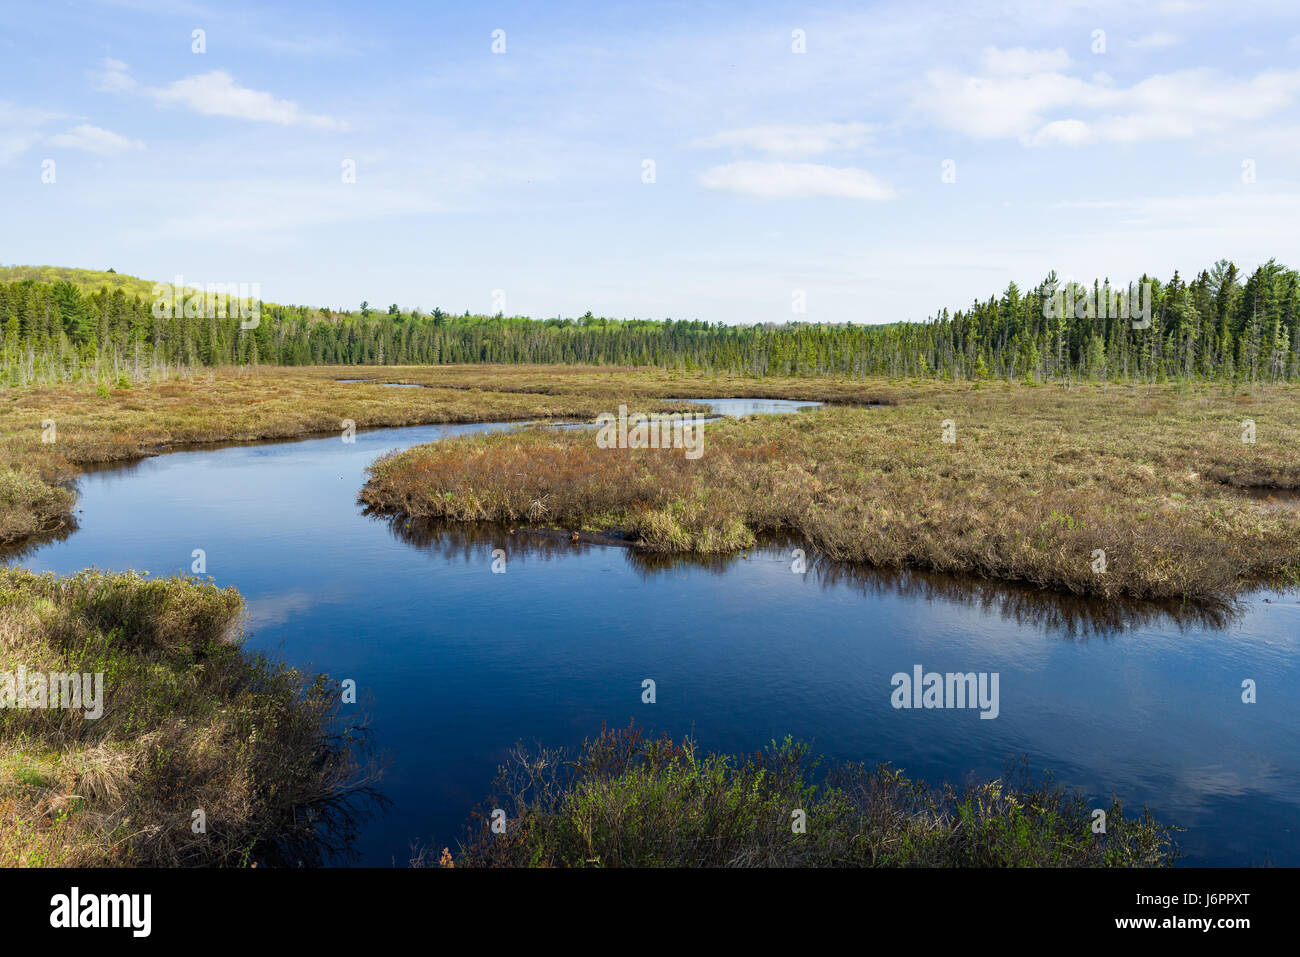 Algonquin Provincial Park Forest And River On A Sunny Spring Day, Ontario, Canada Stock Photo